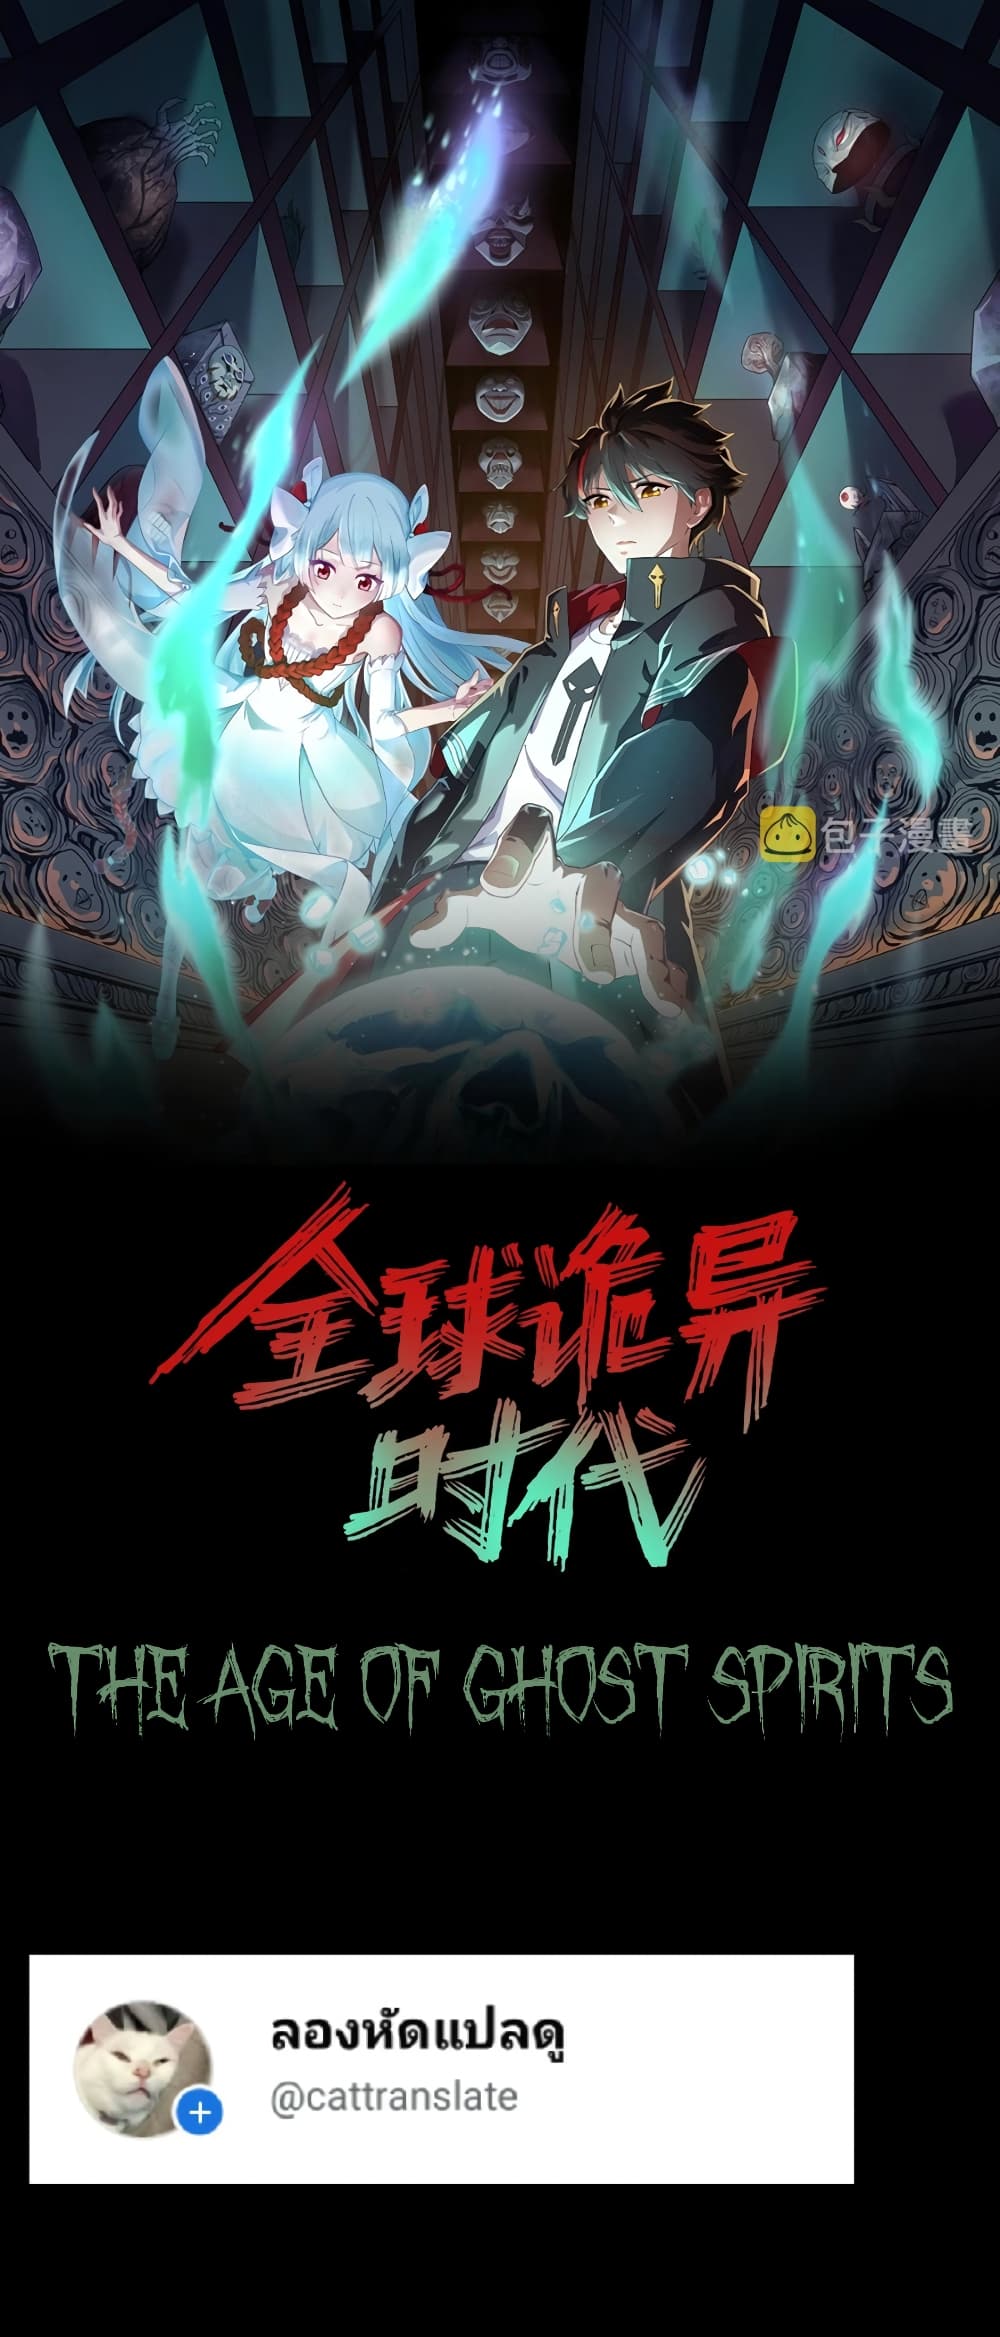 The Age of Ghost Spirits à¸à¸­à¸à¸à¸µà¹ 34 (1)